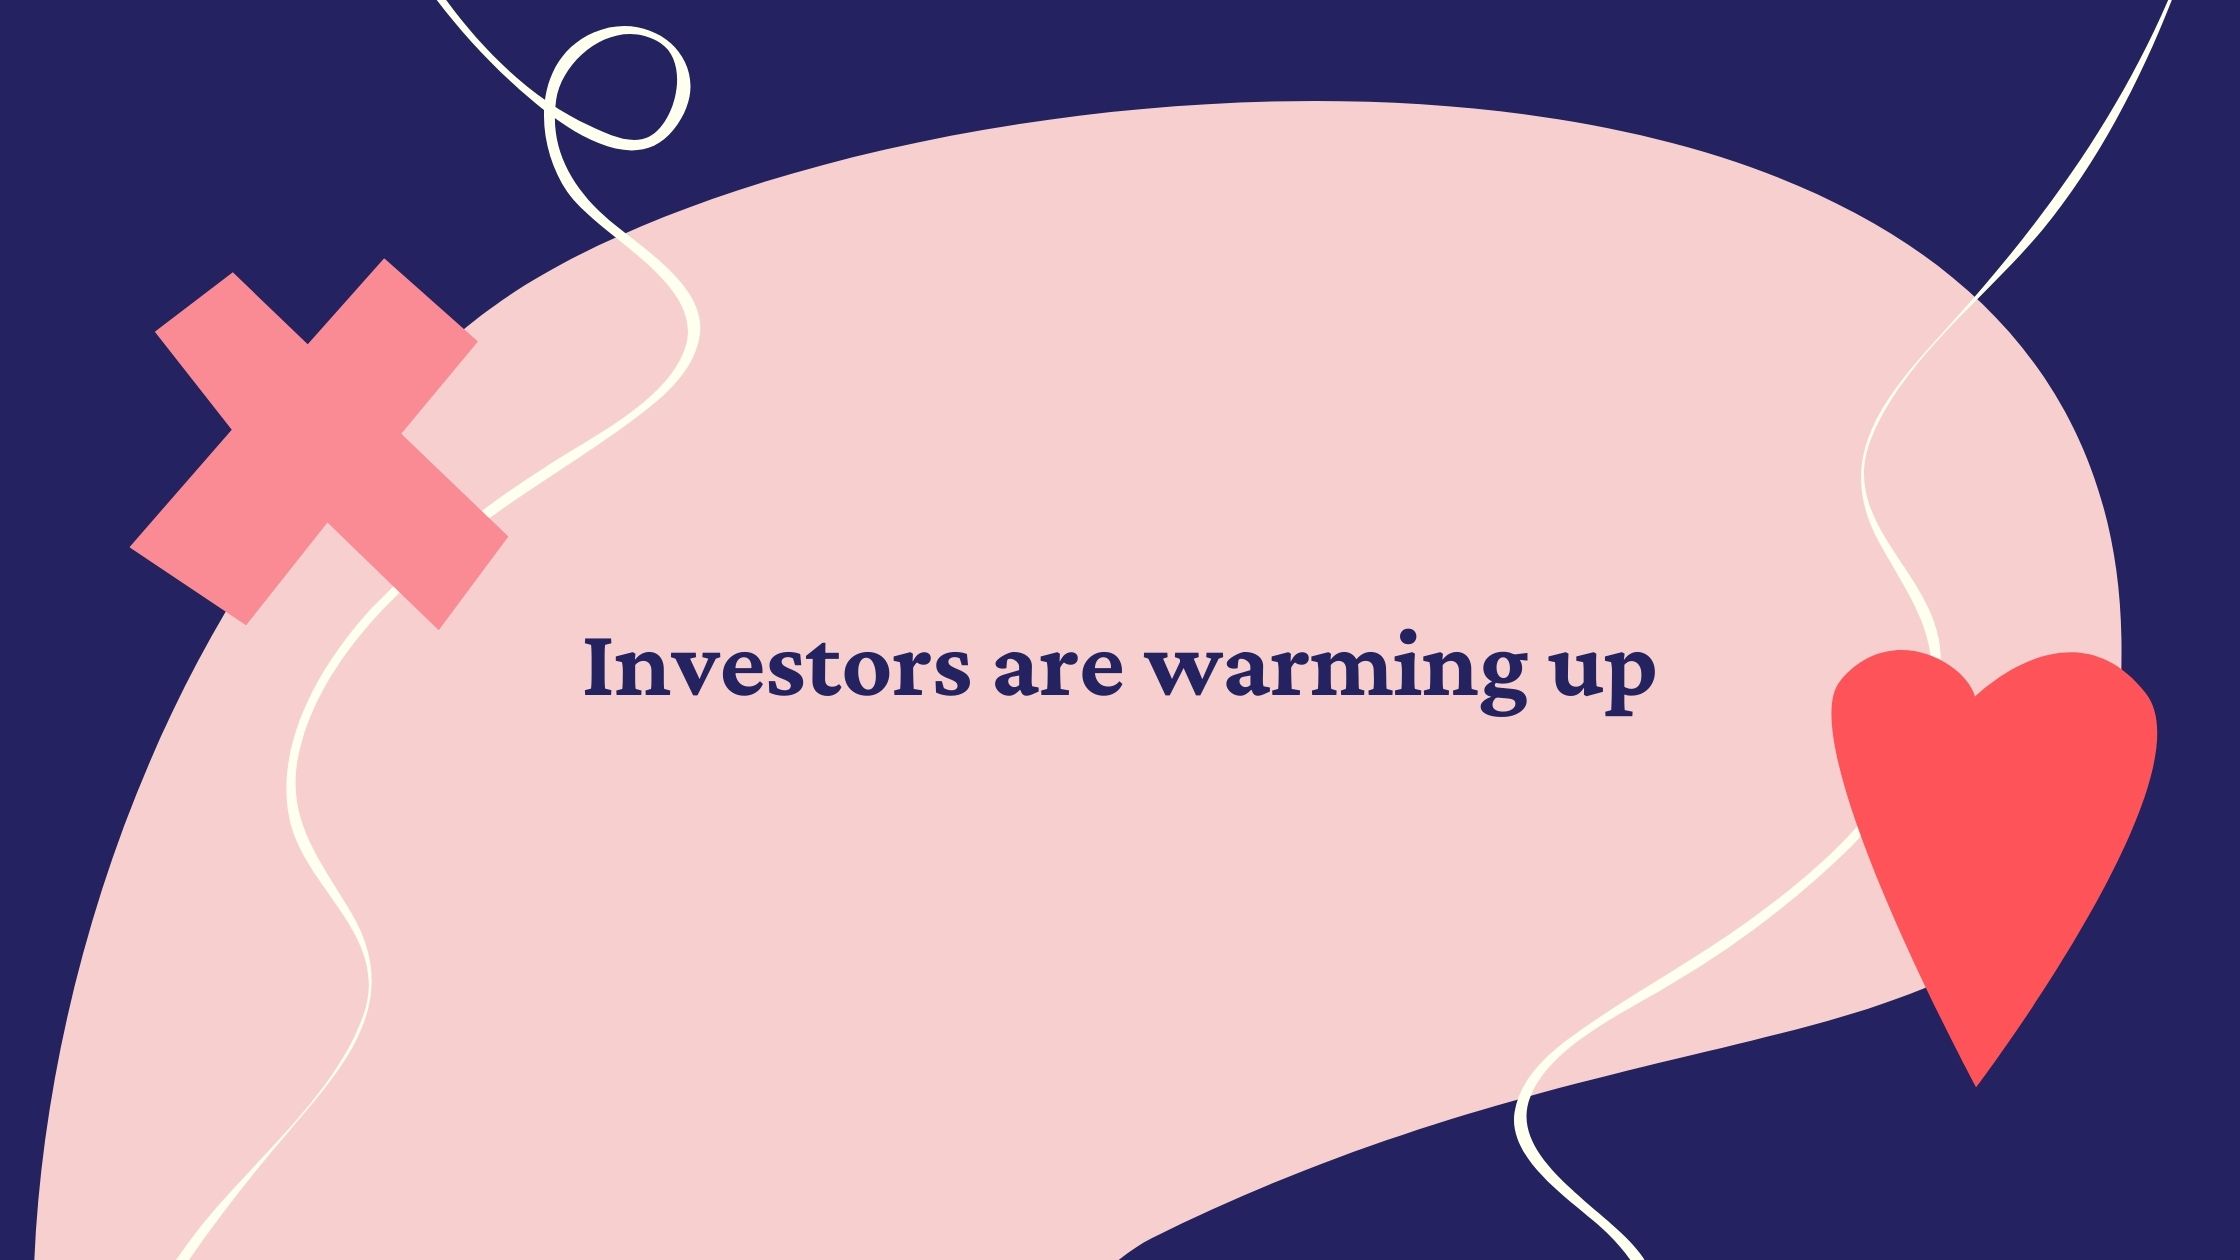 Investors are warming up